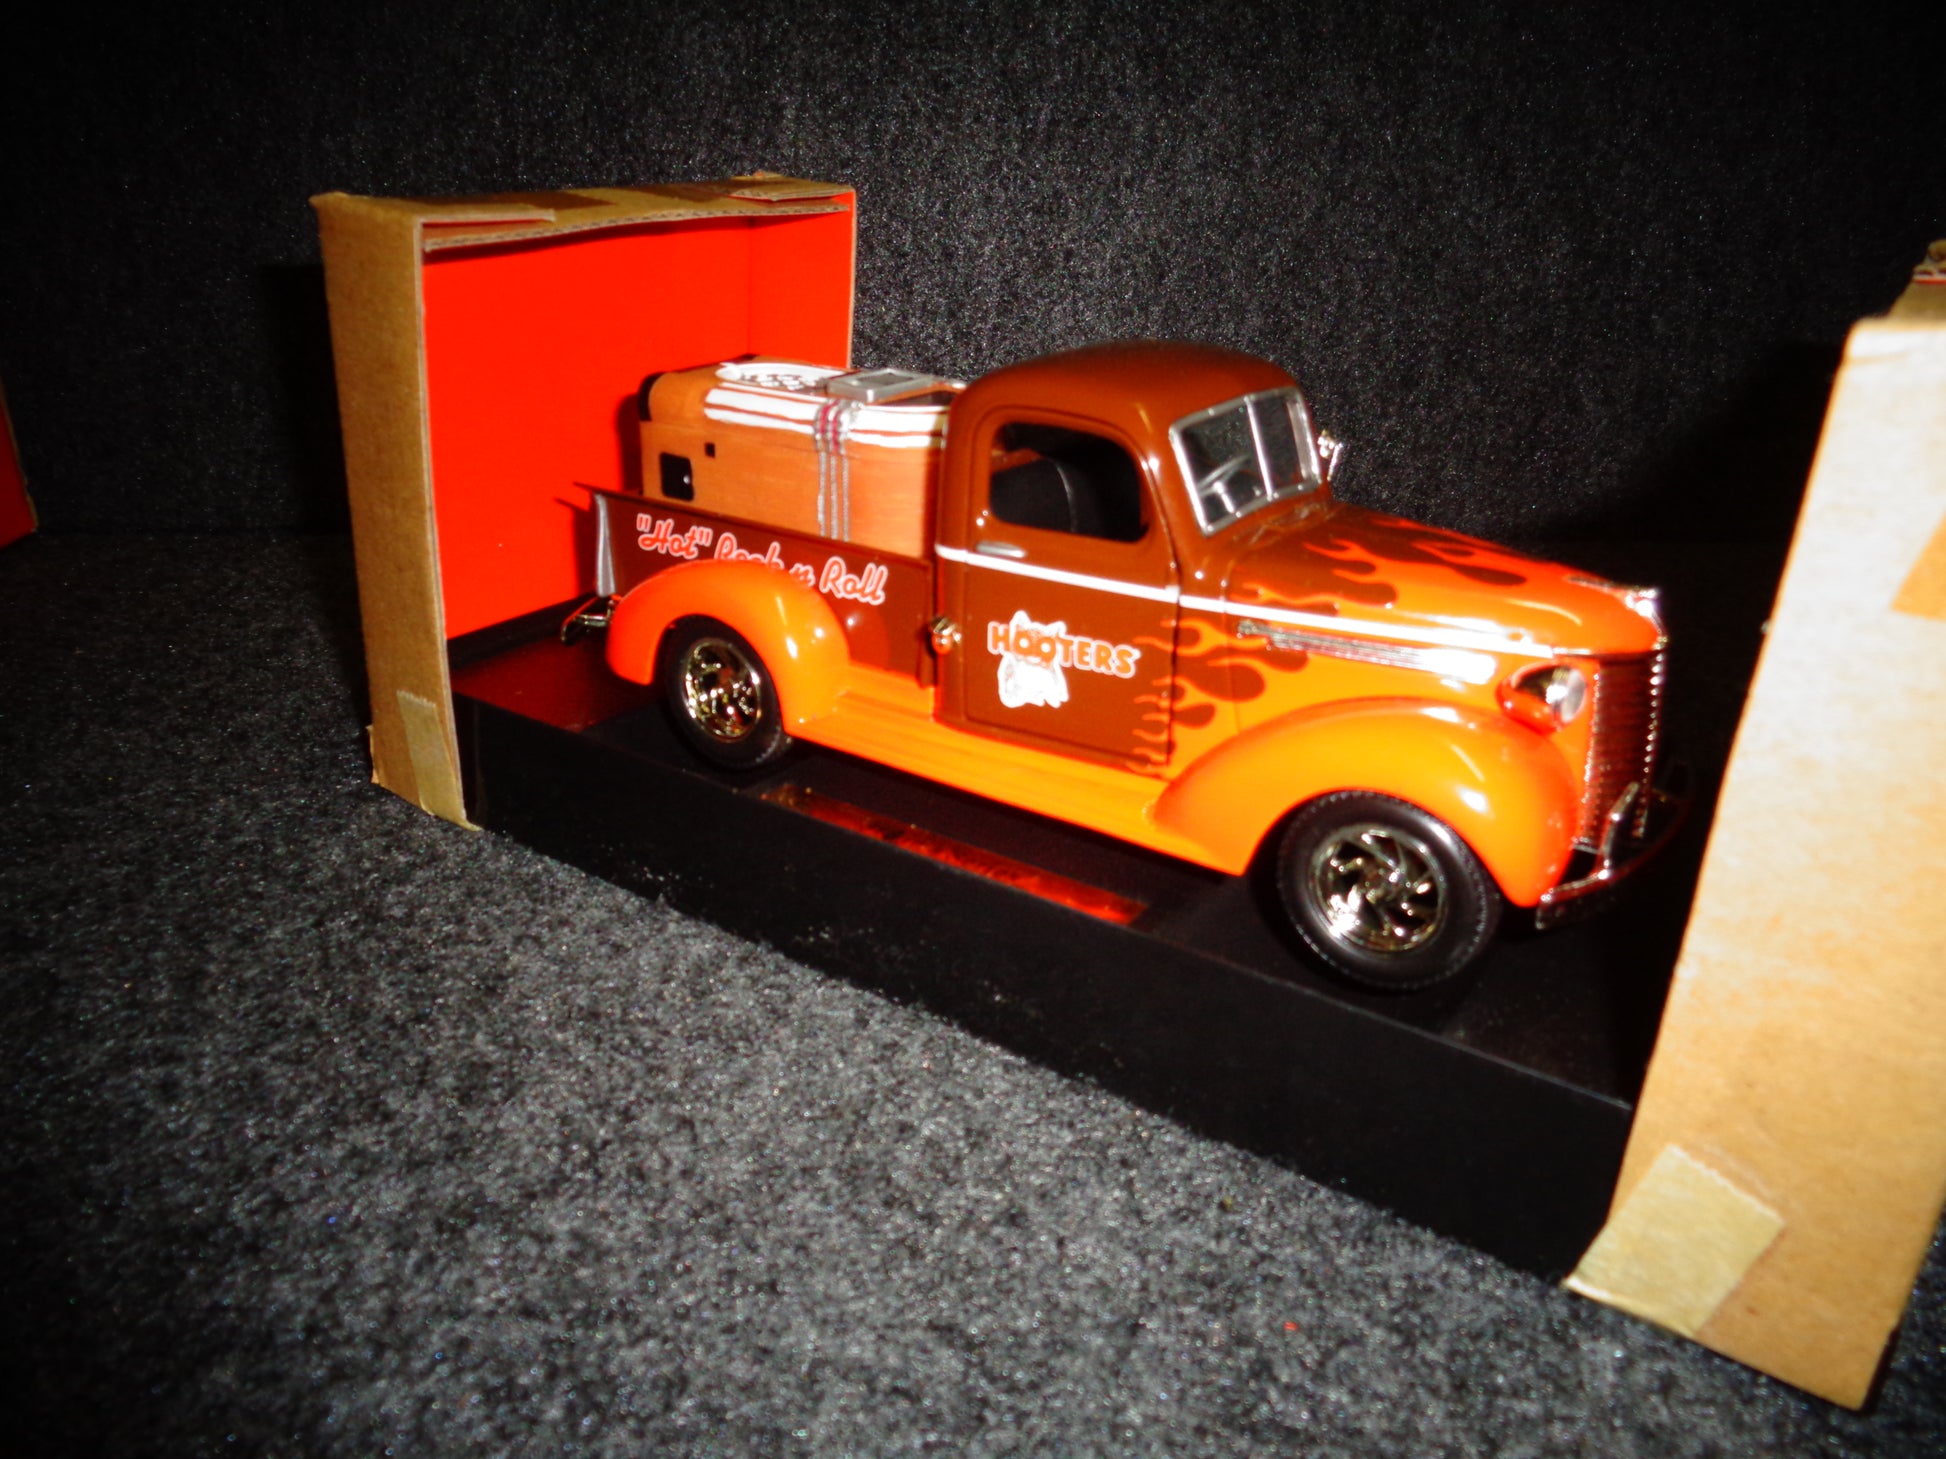 Hooters 1939 Chevrolet Pickup Truck